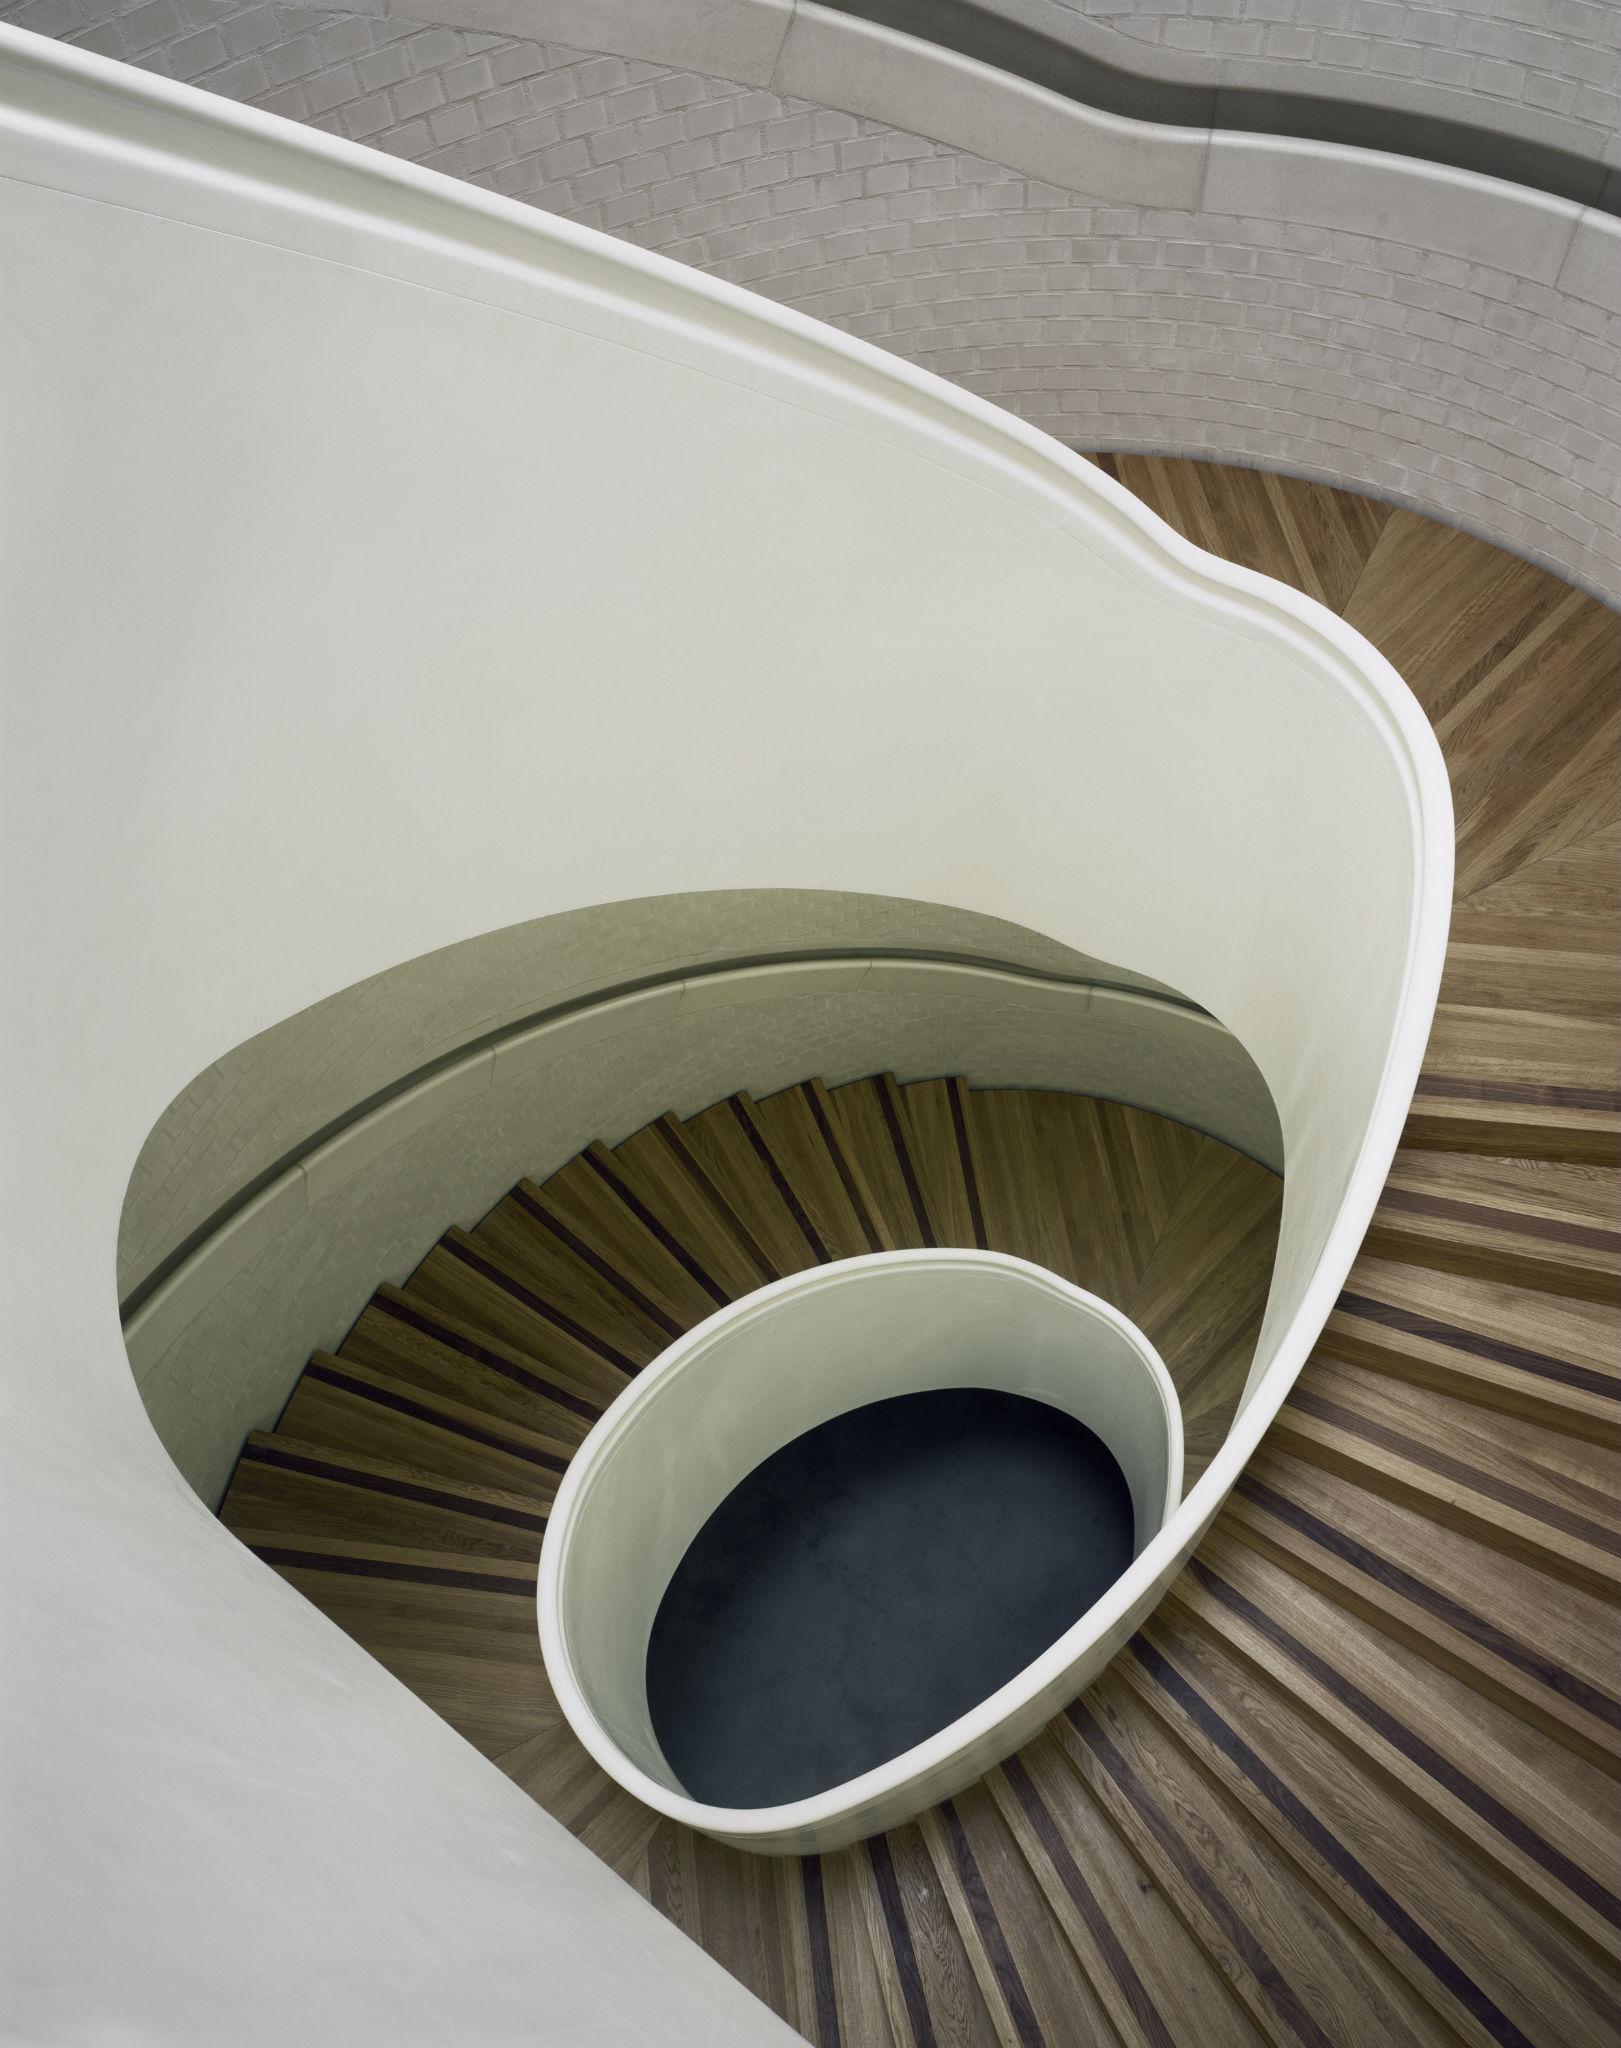 The new spiral staircase in the Newport Street Gallery